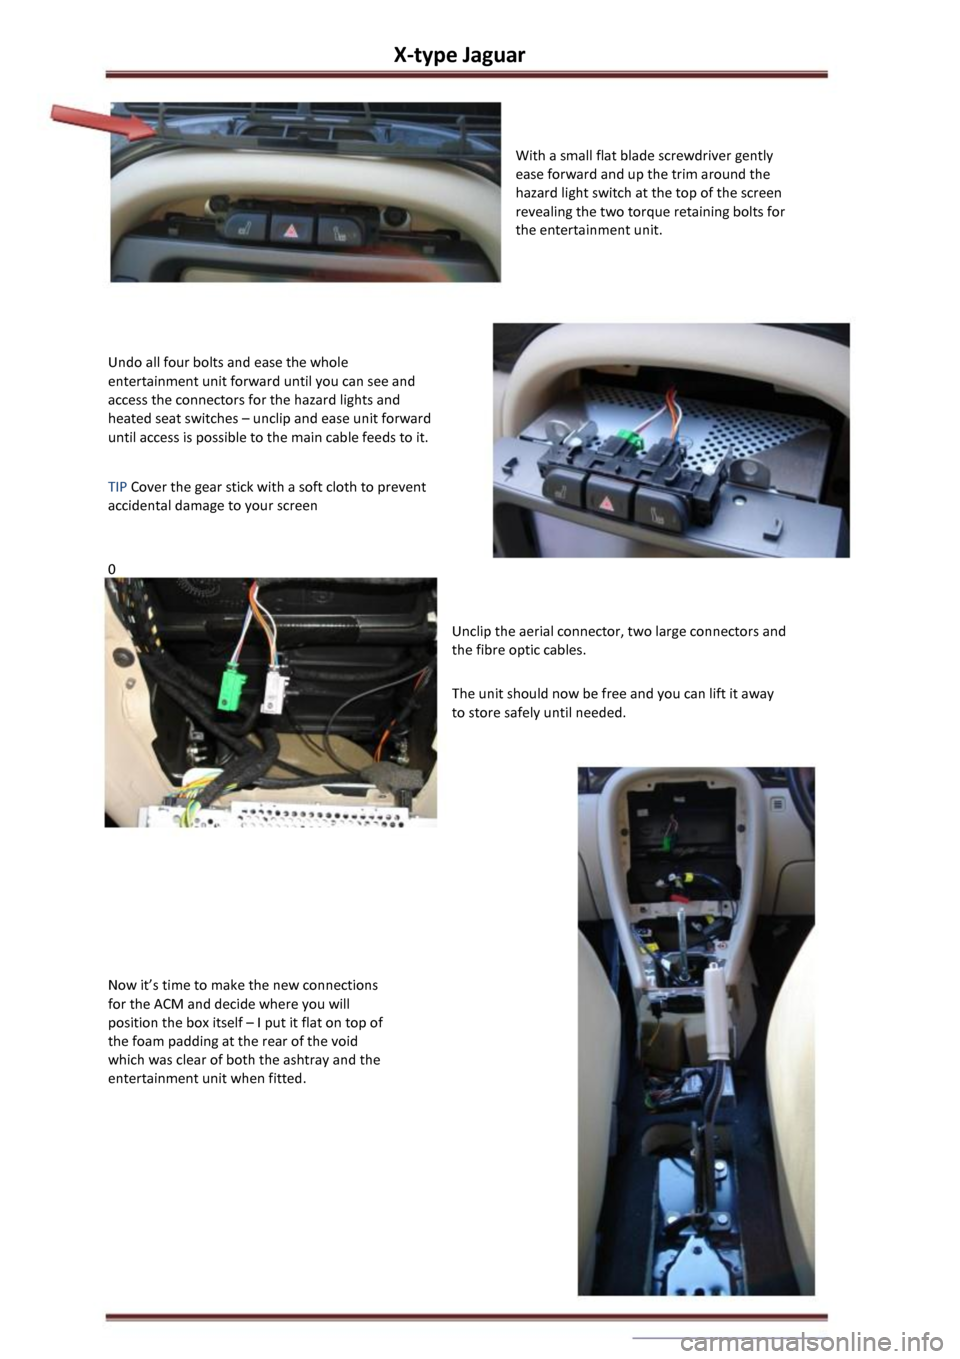 JAGUAR X TYPE 2002 1.G Owners Manual X-type Jaguar 
With a small flat blade screwdriver gently 
ease forward and up the trim around the 
hazard light switch at the top of the screen 
revealing the two torque retaining bolts for 
the ente